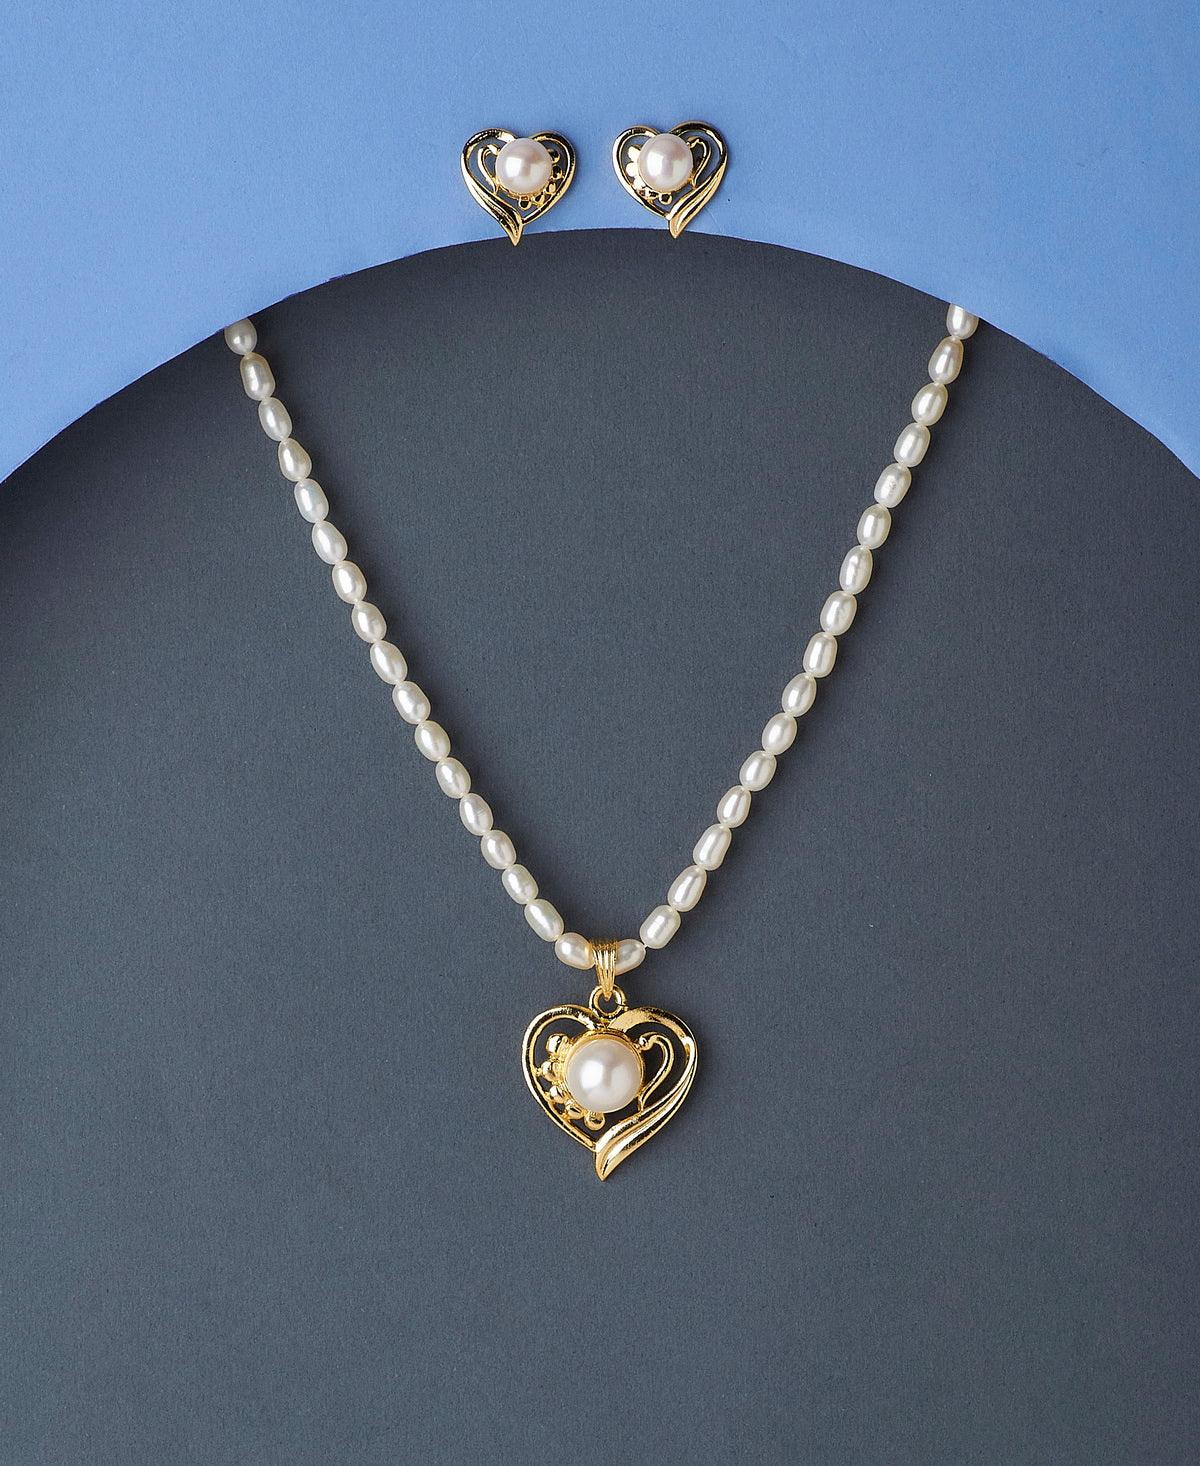 Heart Shaped Real Pearl Necklace Set - Chandrani Pearls